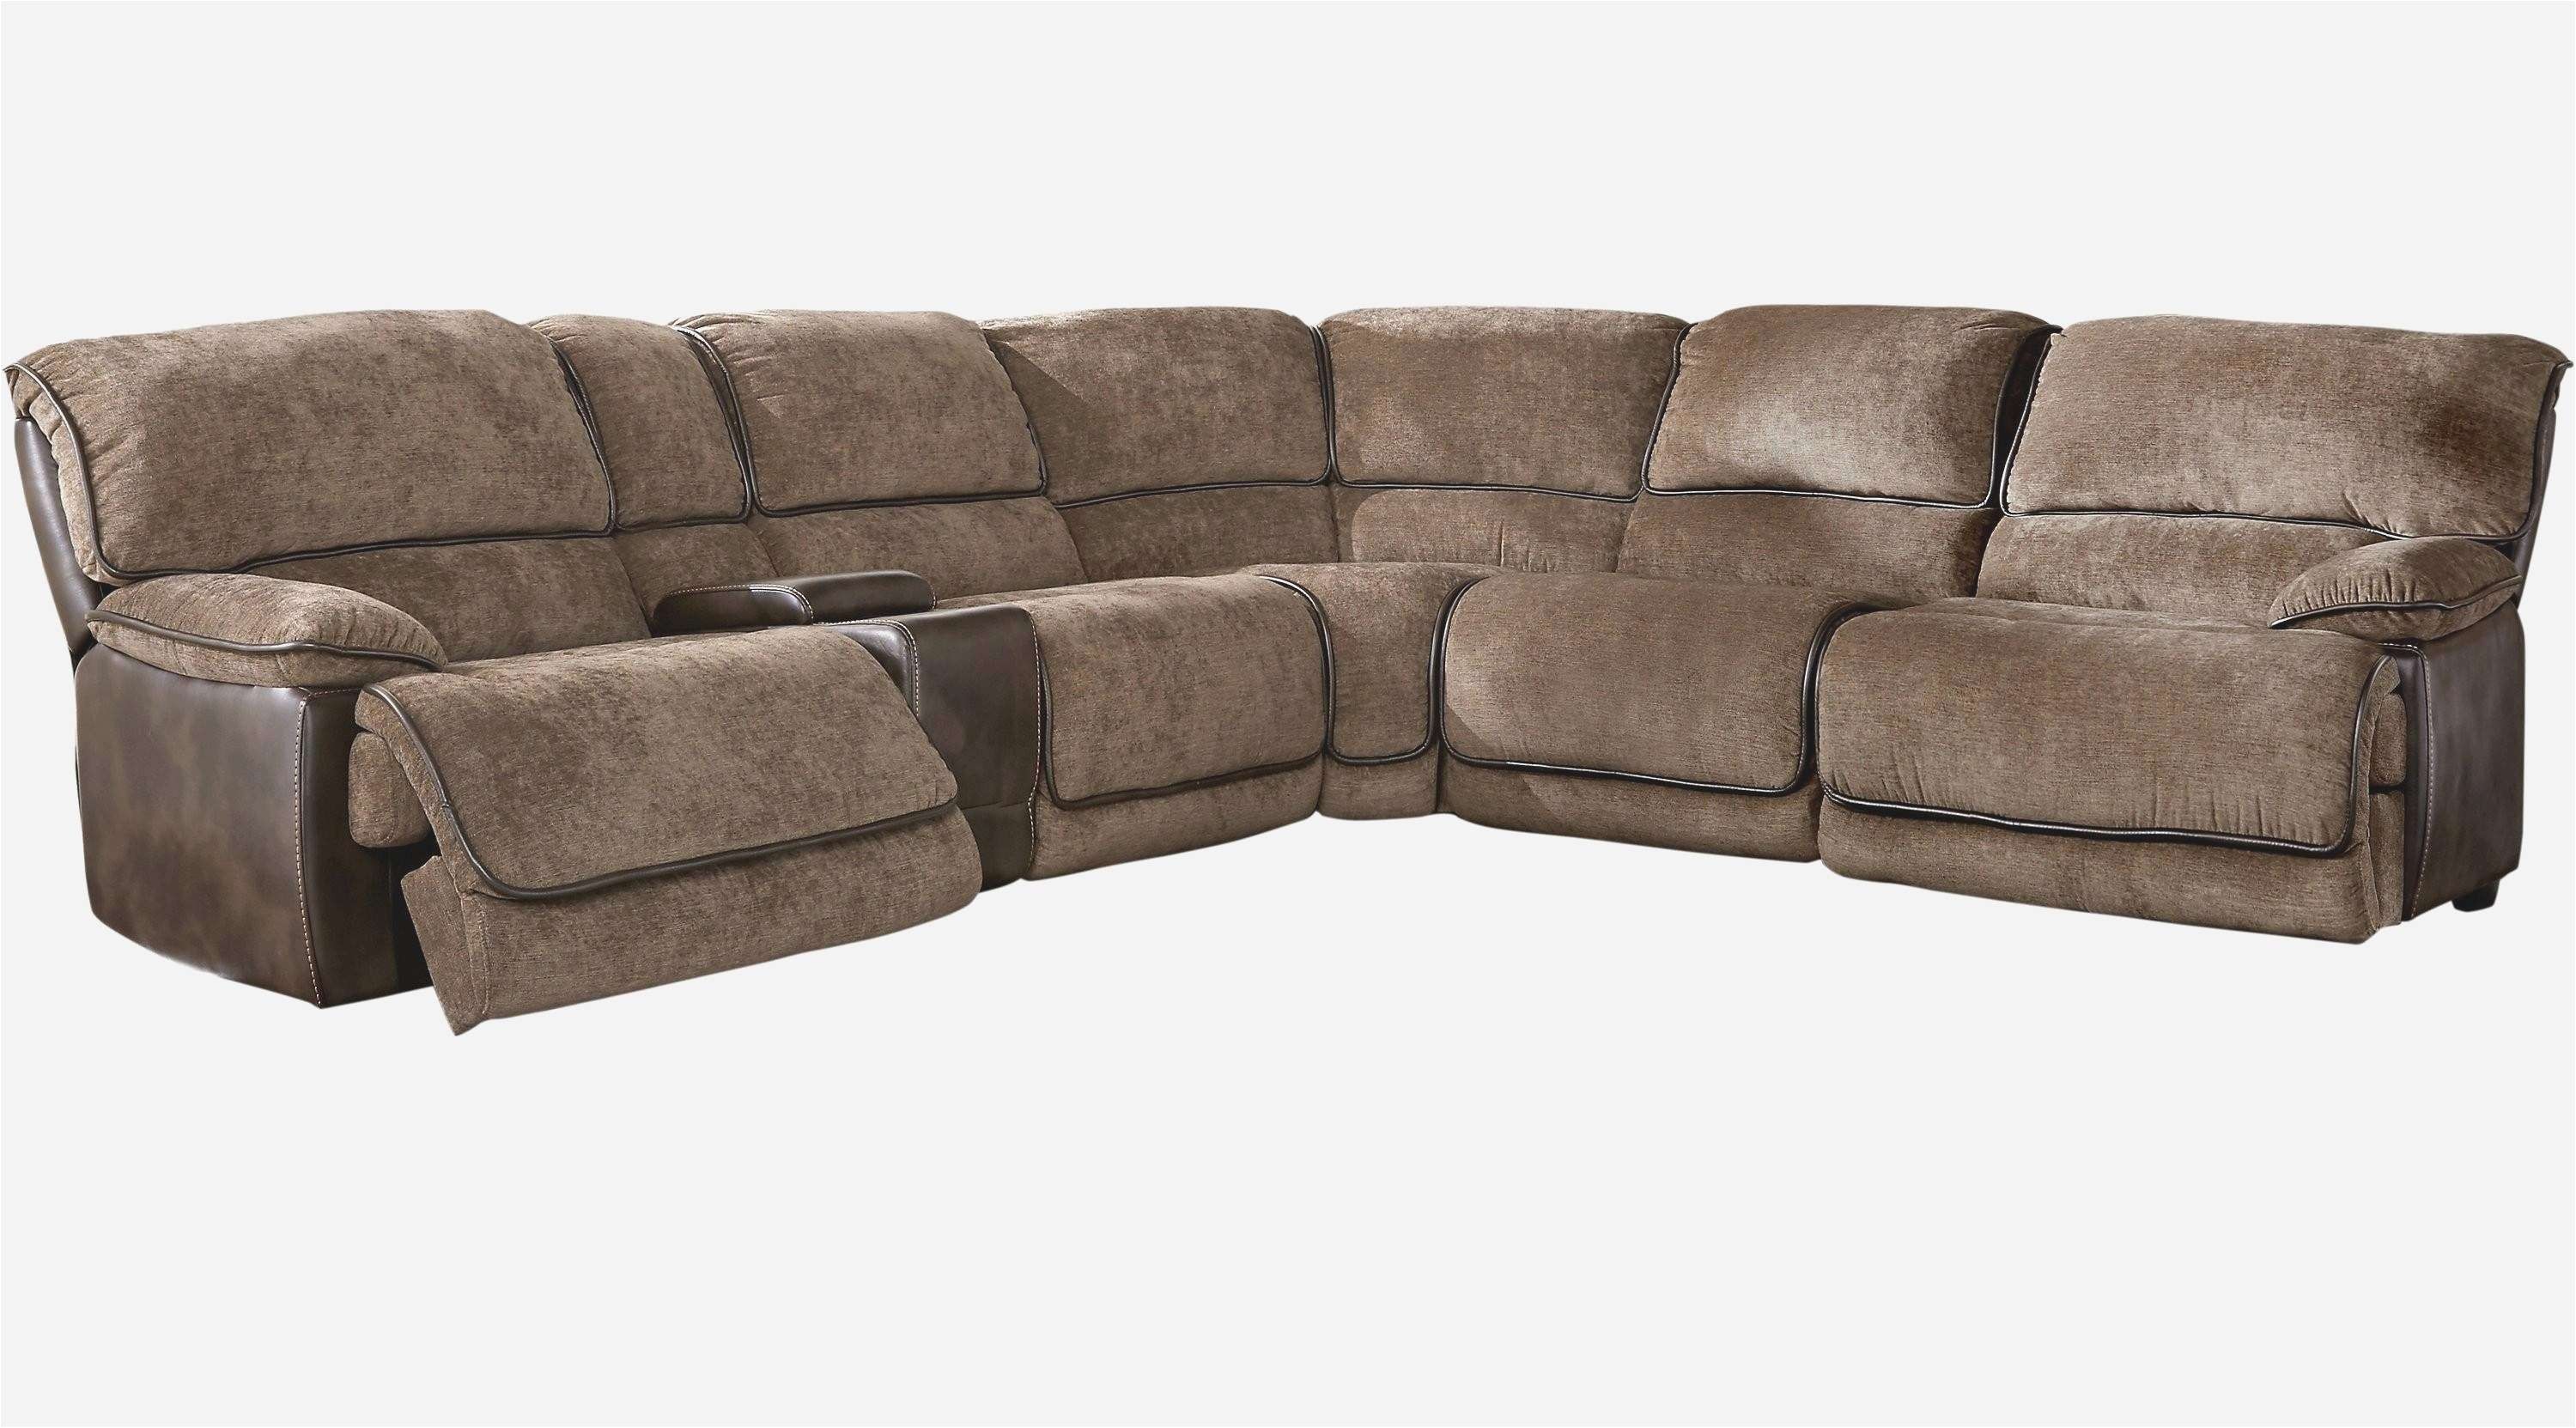 24 cheap sectional furniture cheerful slipcover sectional sofa luxury couch cover new sectional couch 0d